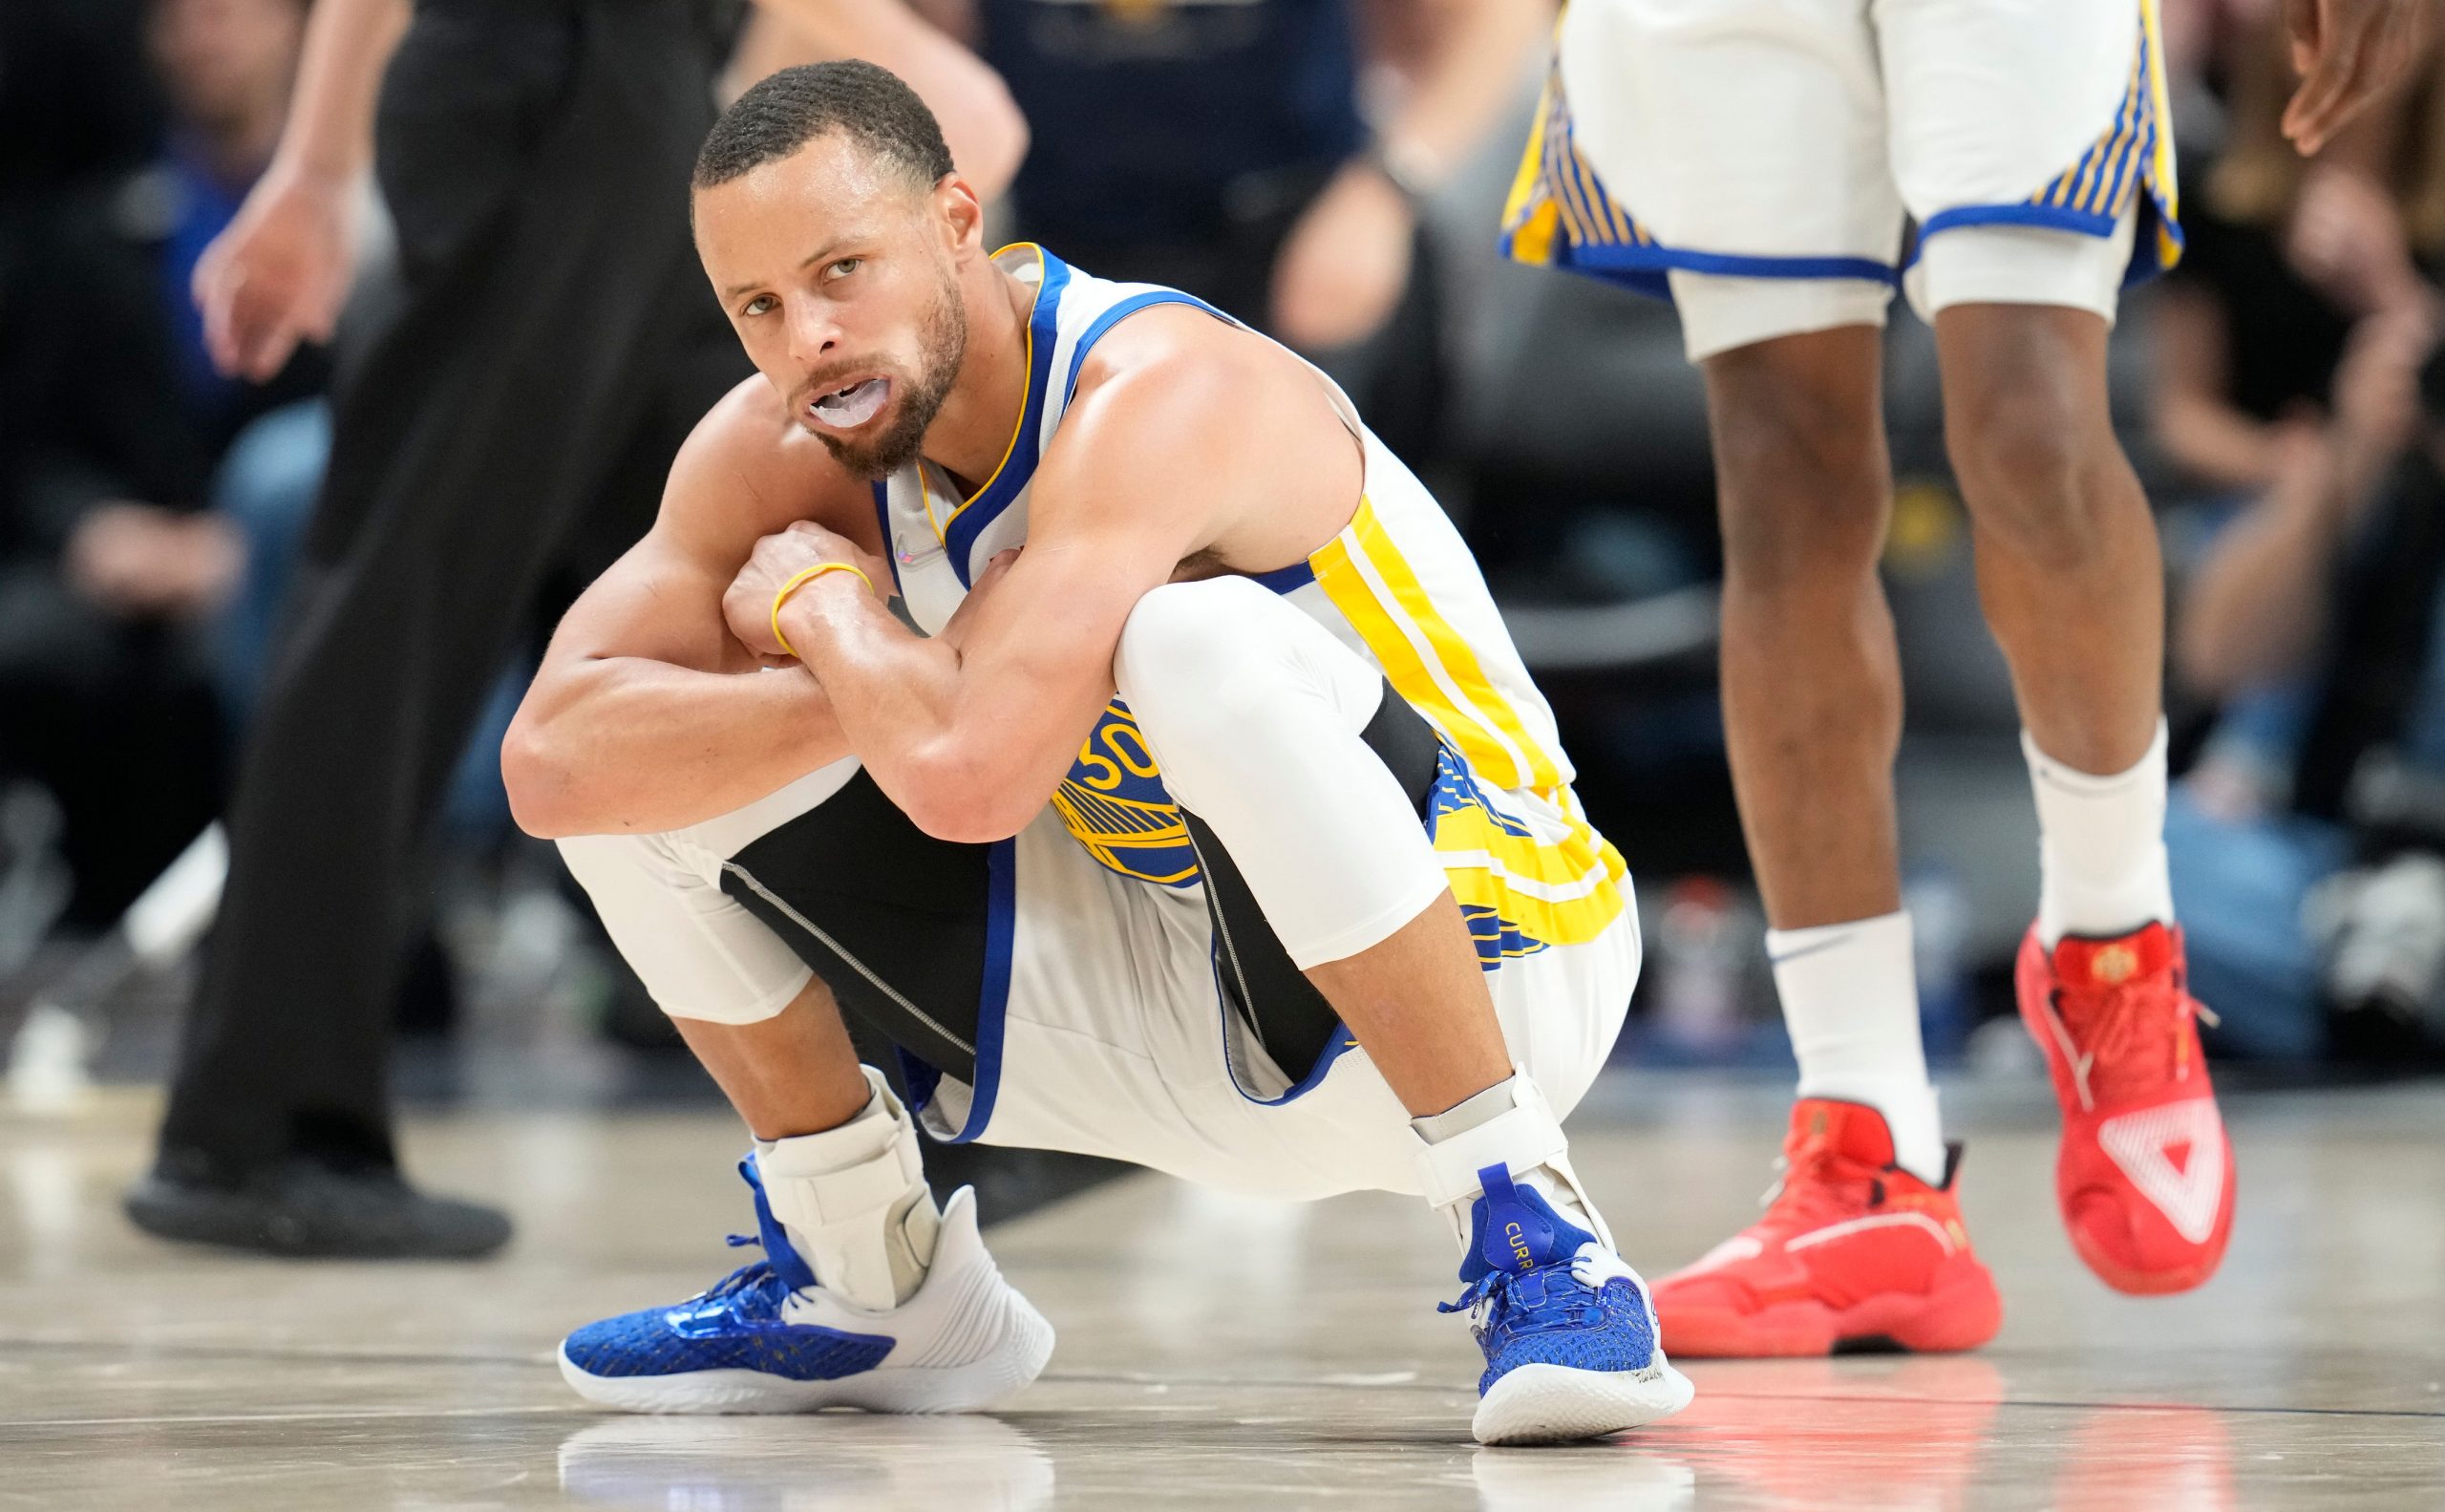 NBA Finals: Stephen Curry is confident he’ll play Game 4 despite injury